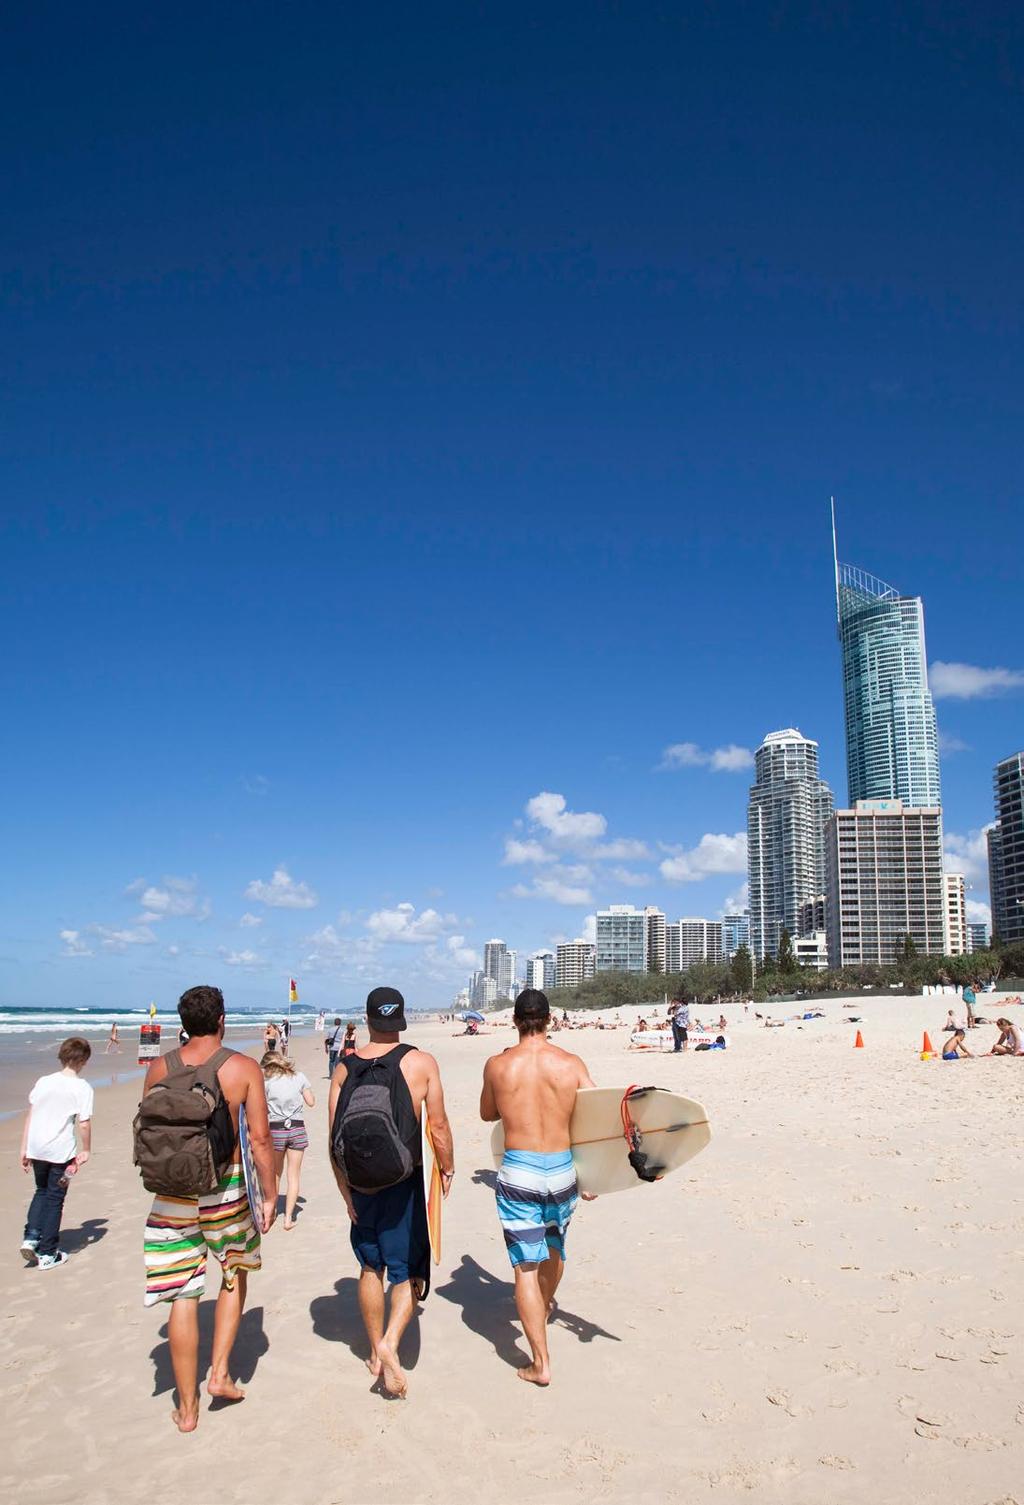 SURFERS PARADISE YHA BUDGET GROUP ACCOMMODATION - 2018 Surfers Paradise YHA provides quality budget accommodation at picturesque Main Beach, a short walk from the beach and Sea World.